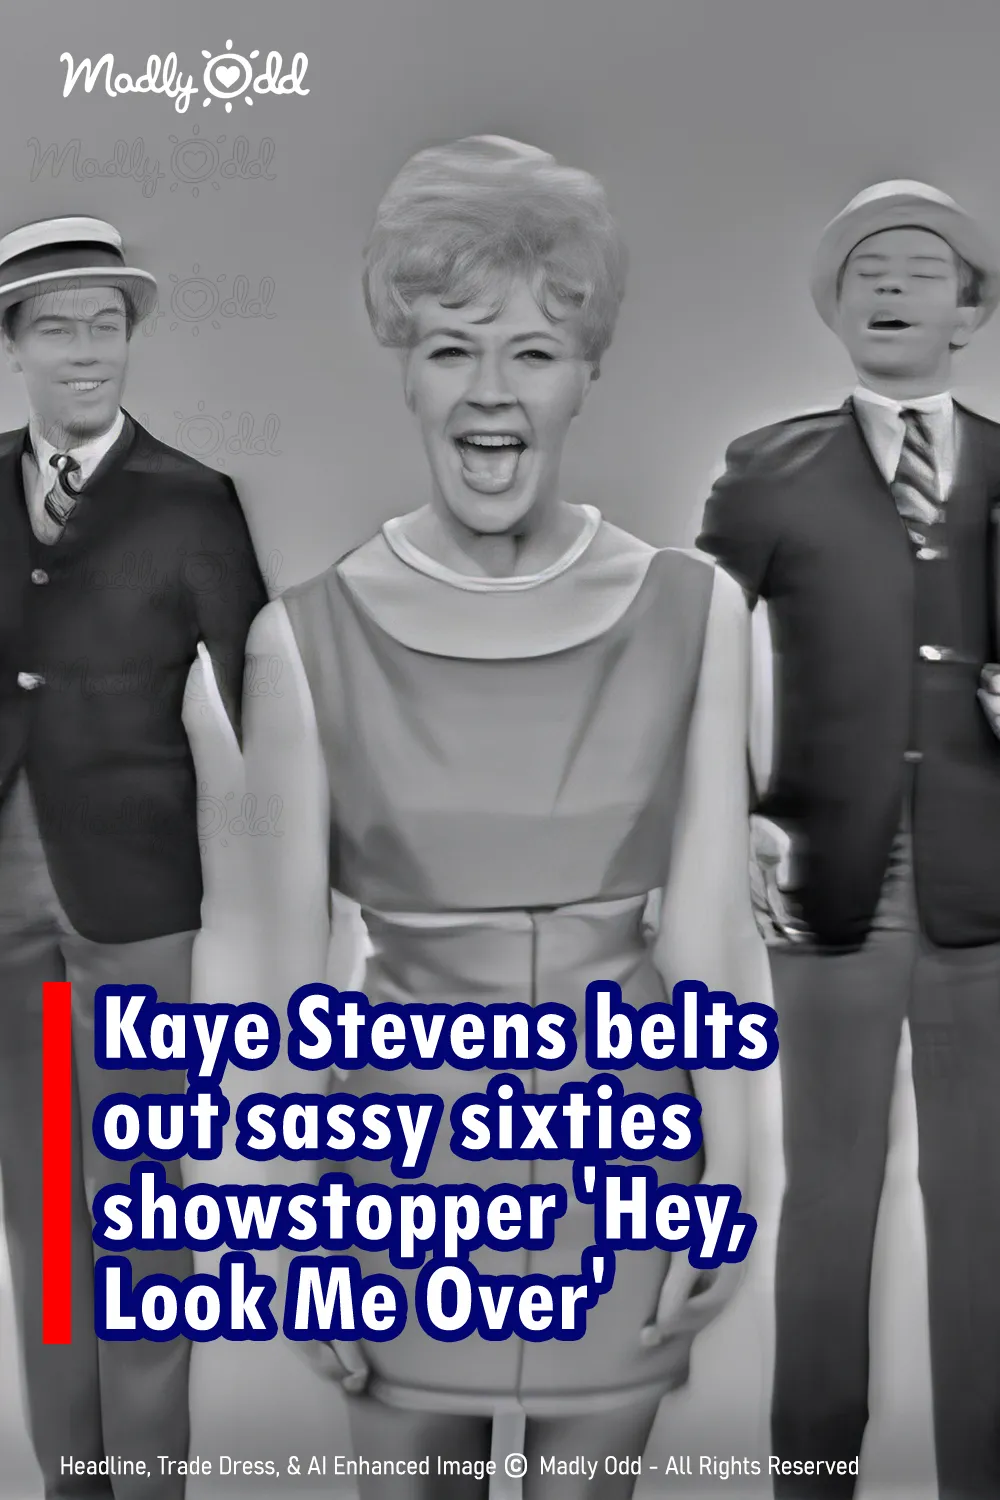 Kaye Stevens \'Hey, Look Me Over\' a sassy sixties showstopper on Sullivan